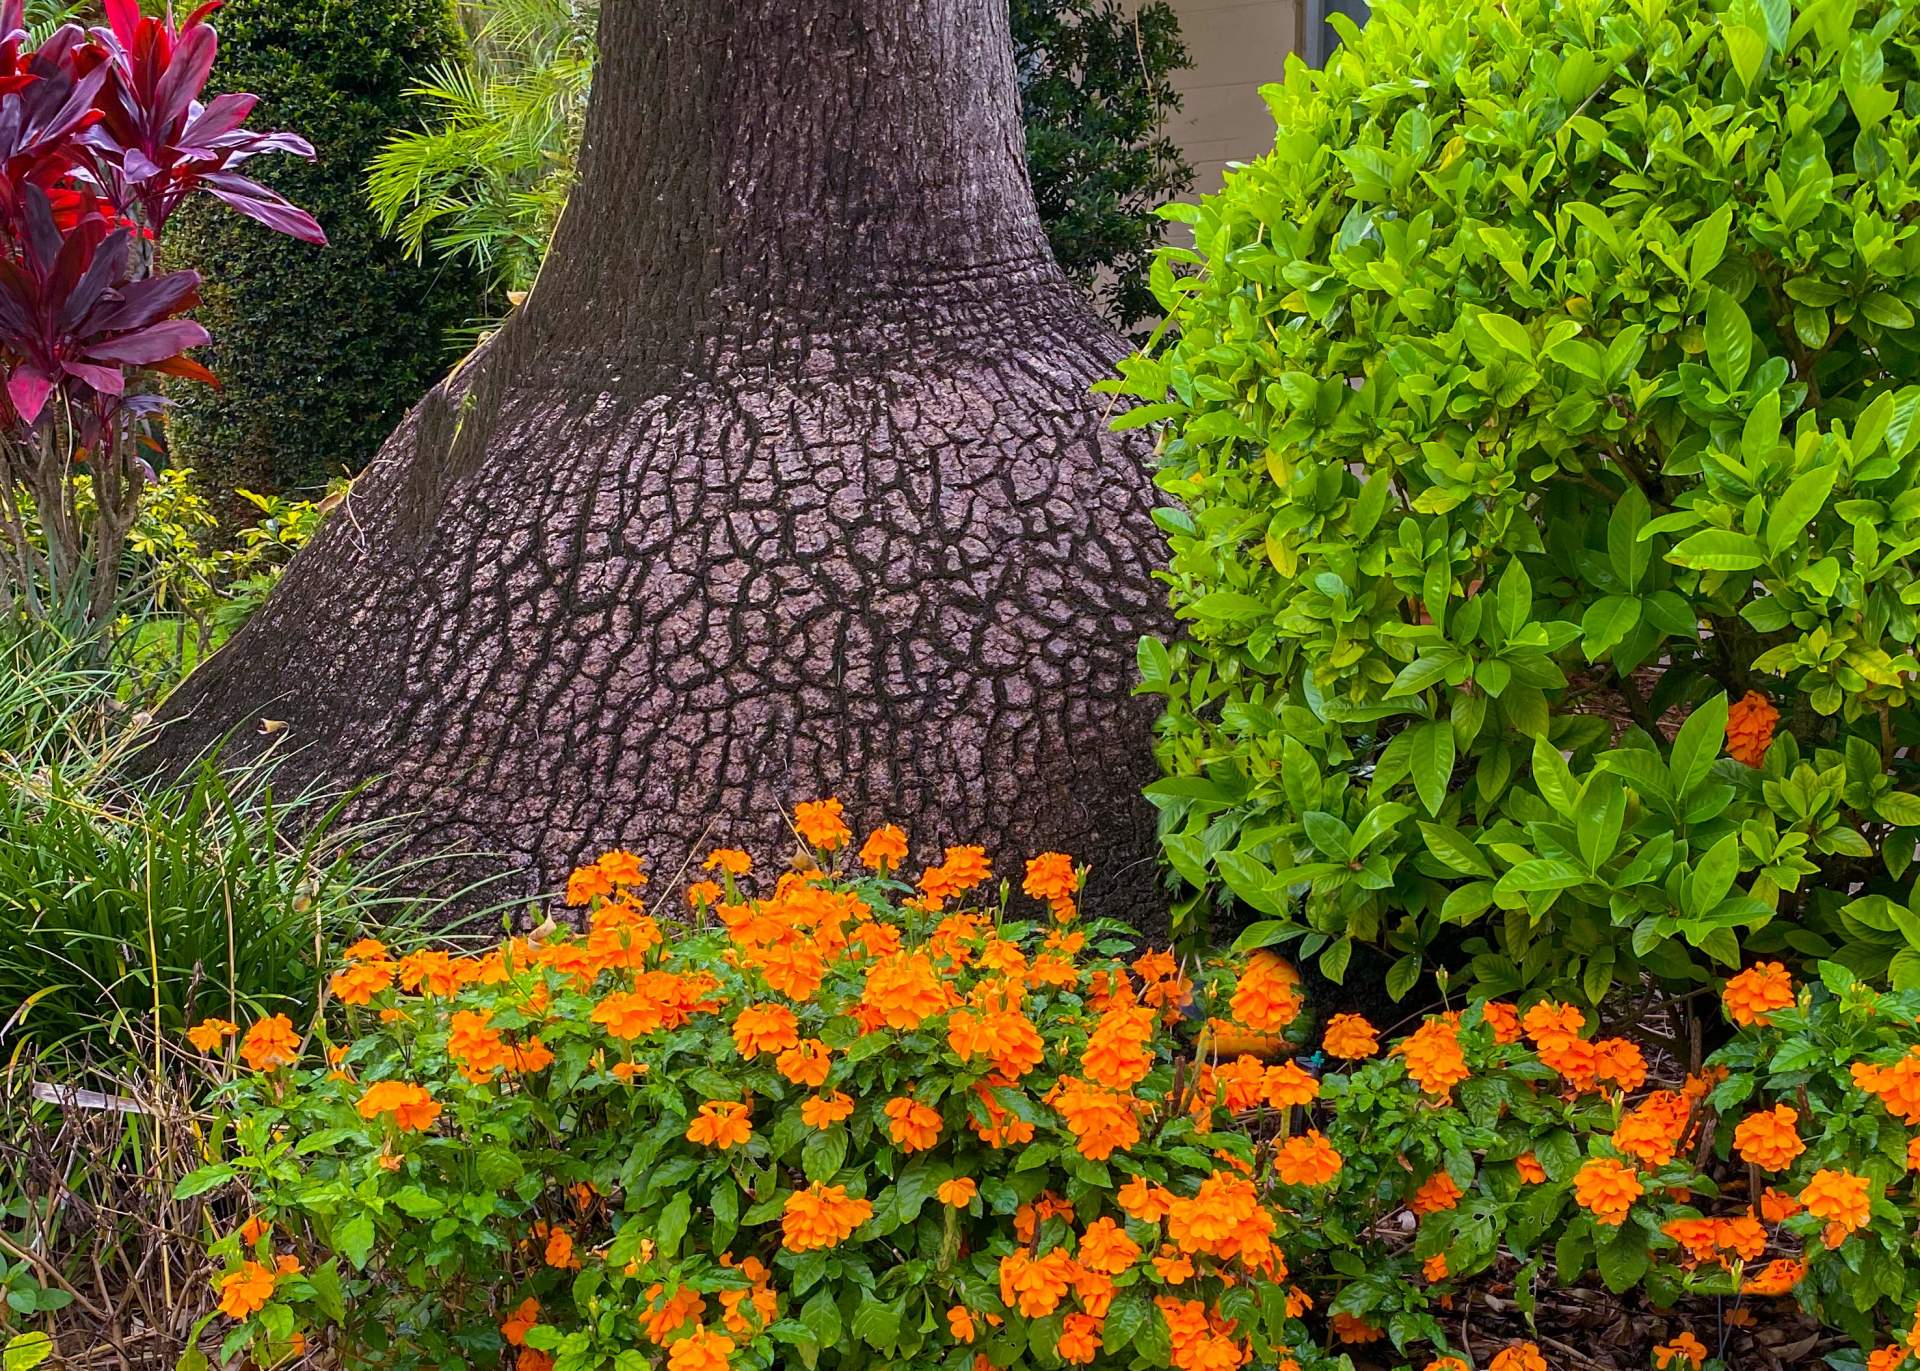 Base of a tree with orange flowers and green plants